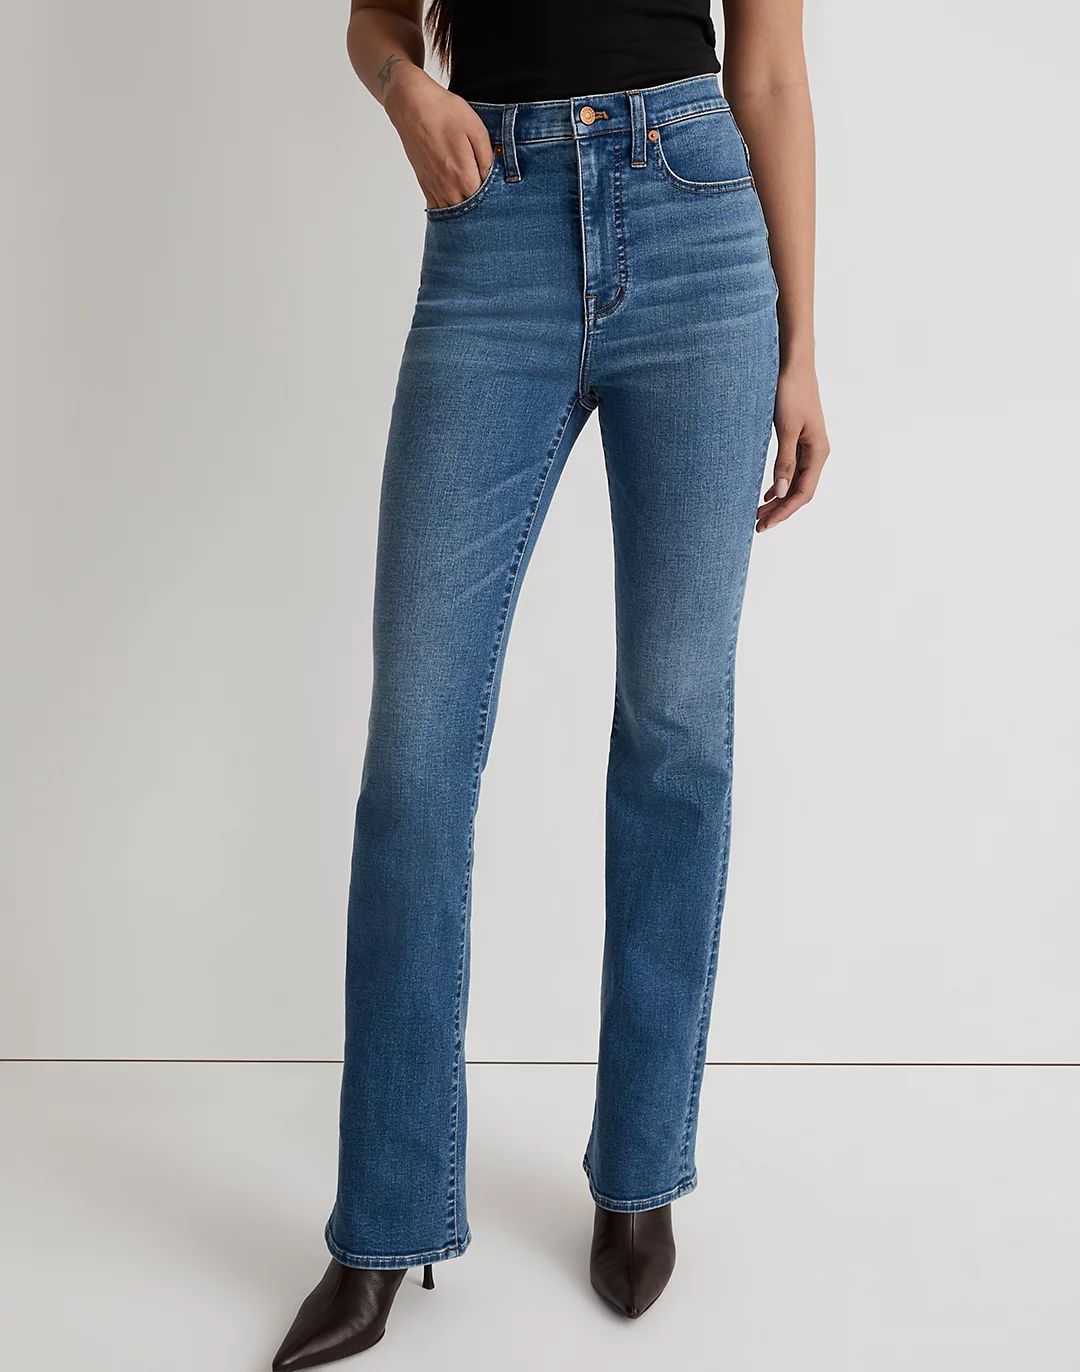 Tall Skinny Flare Jeans in Elevere Wash | Madewell